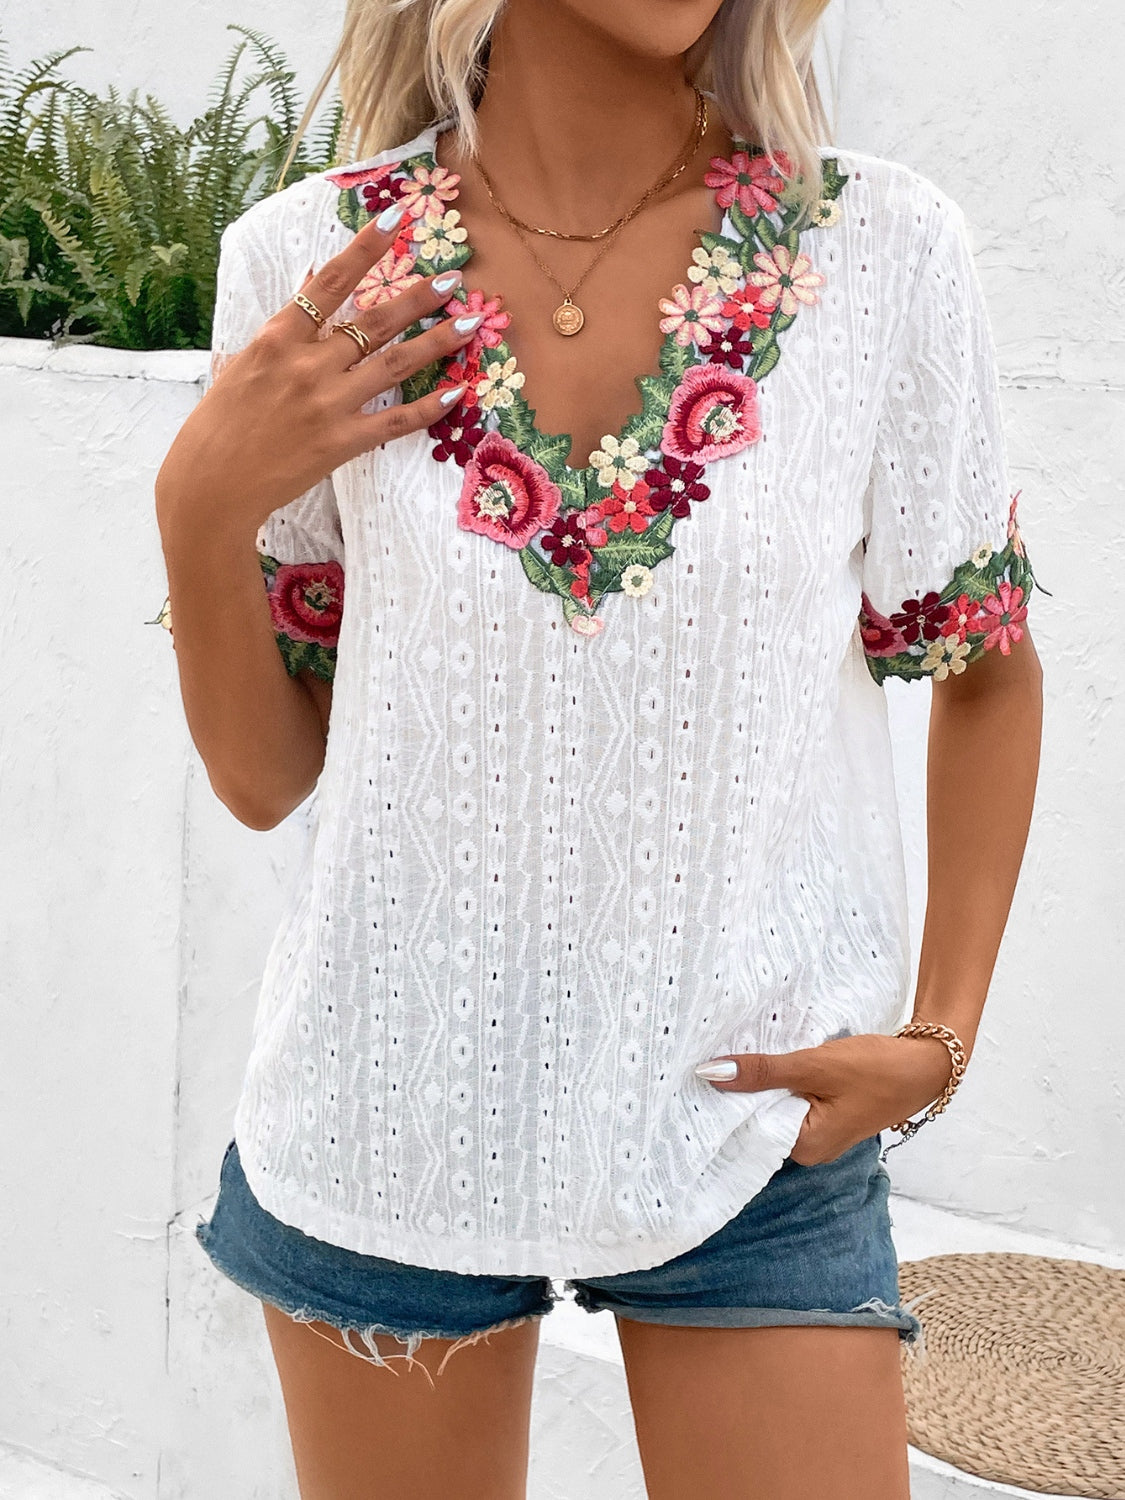 Discover the chic Eyelet Embroidered V-Neck Blouse in four colors. Perfect blend of comfort and style for any occasion. Shop now!